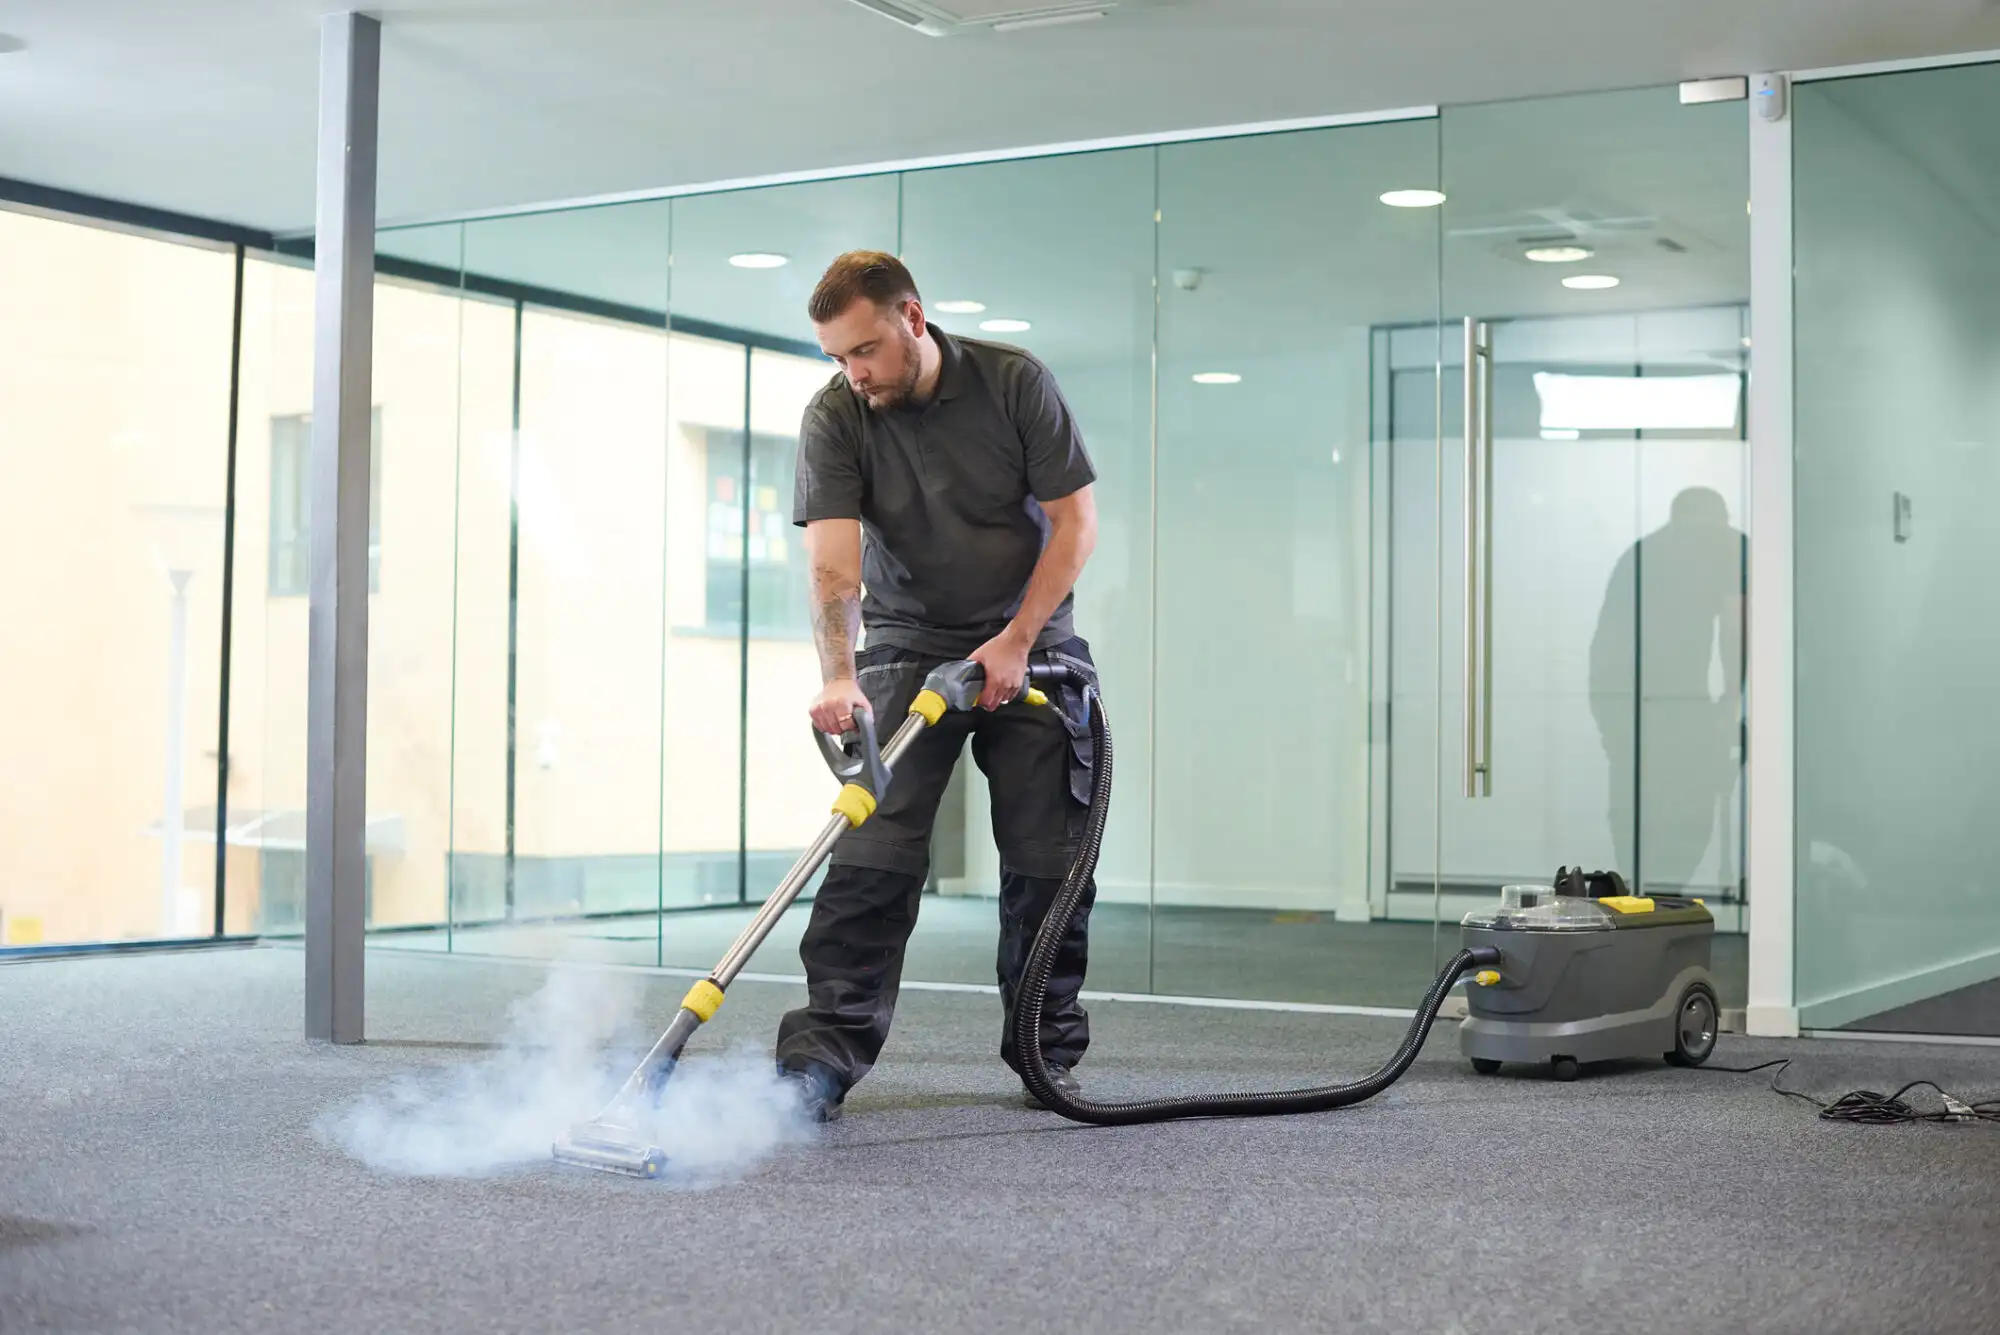 Man using industrial floor cleaning equipment in an office setting.